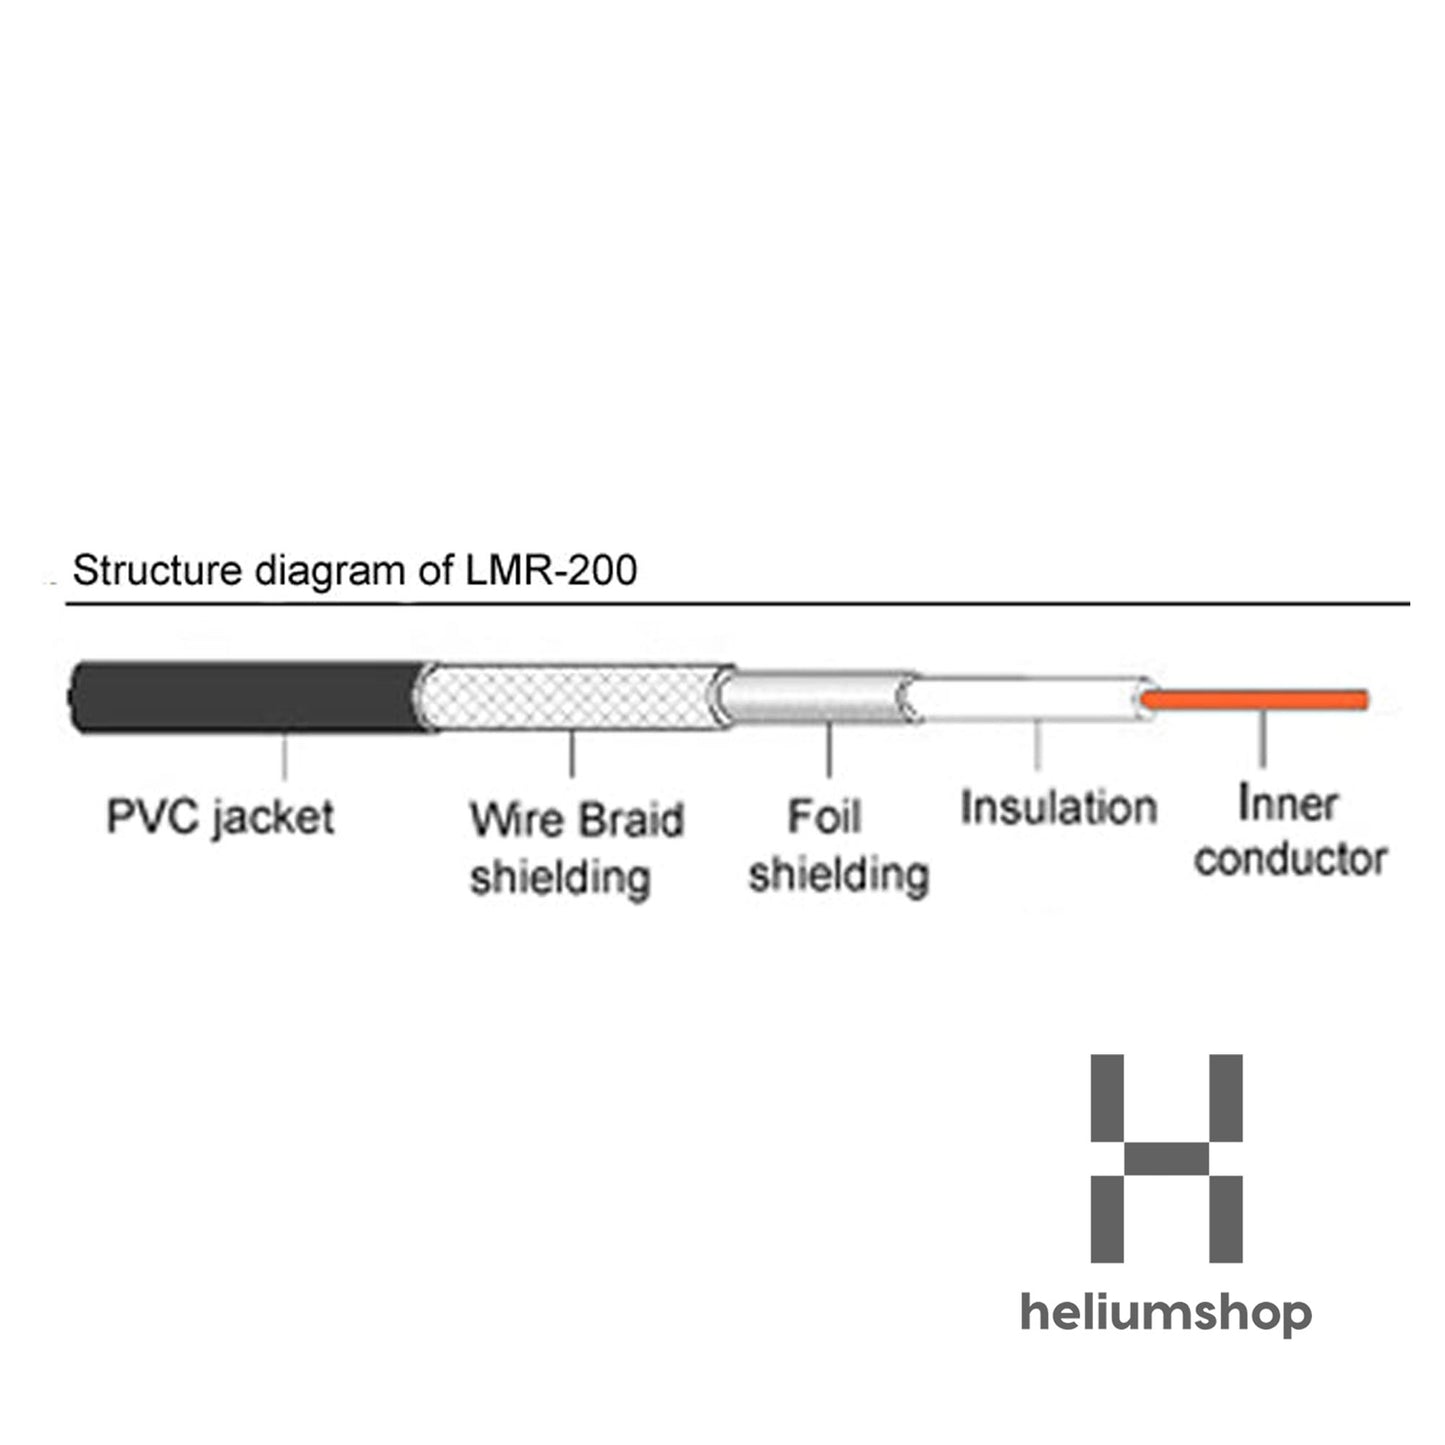 Diagramm of an LMR200 cable